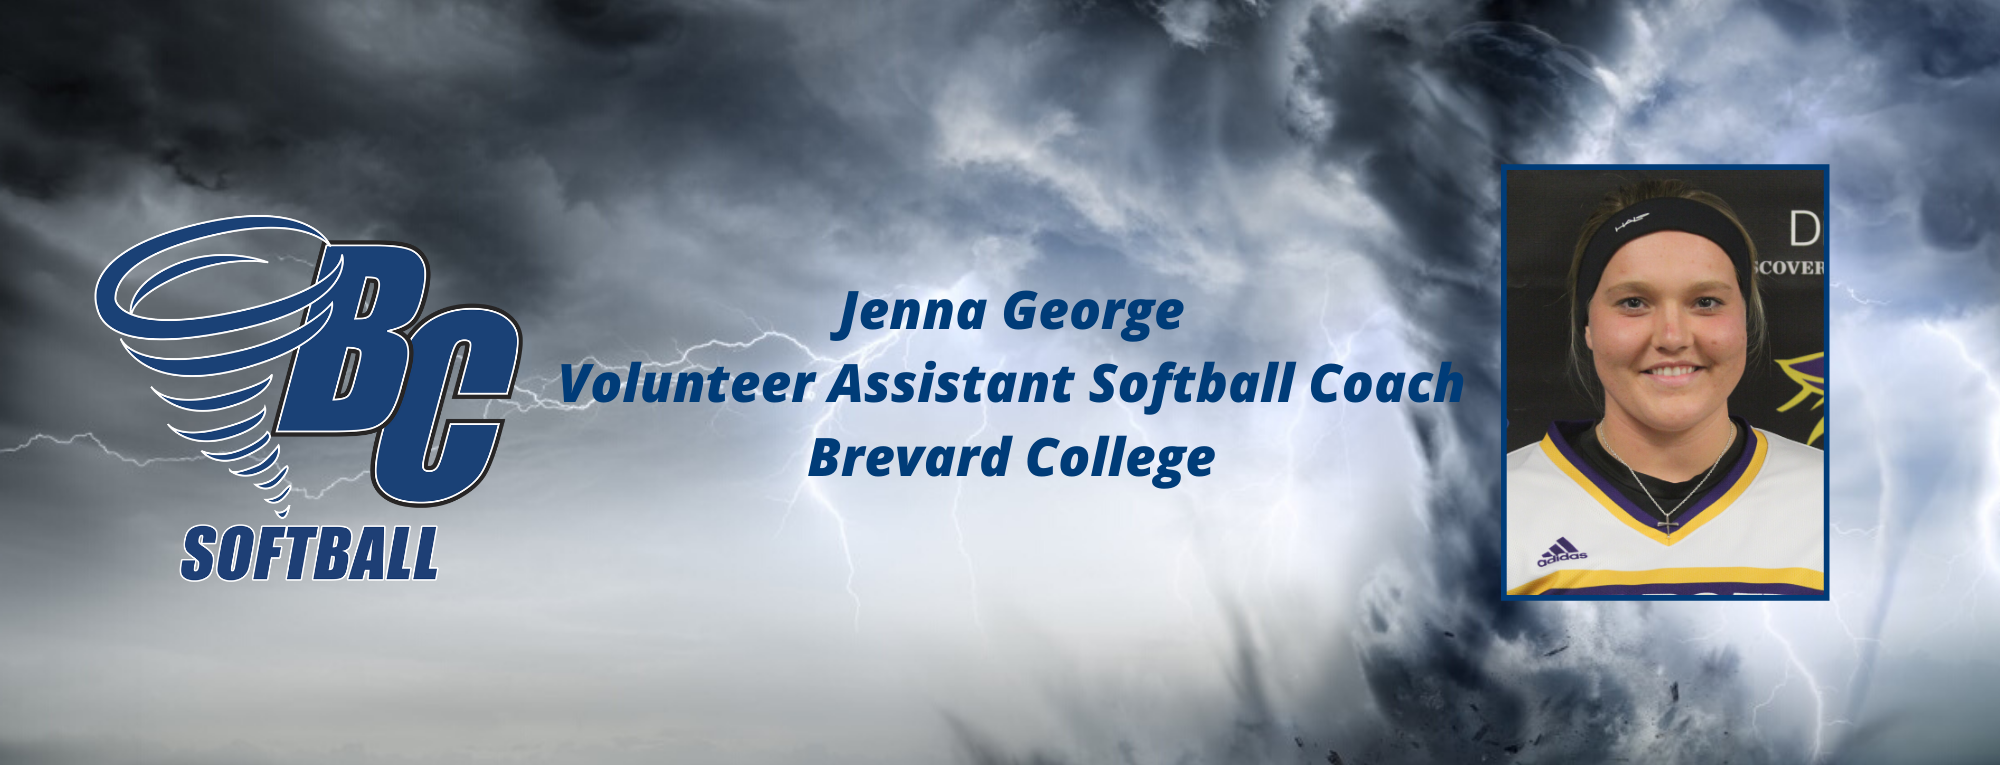 Jenna George Named Volunteer Assistant Coach at Brevard College